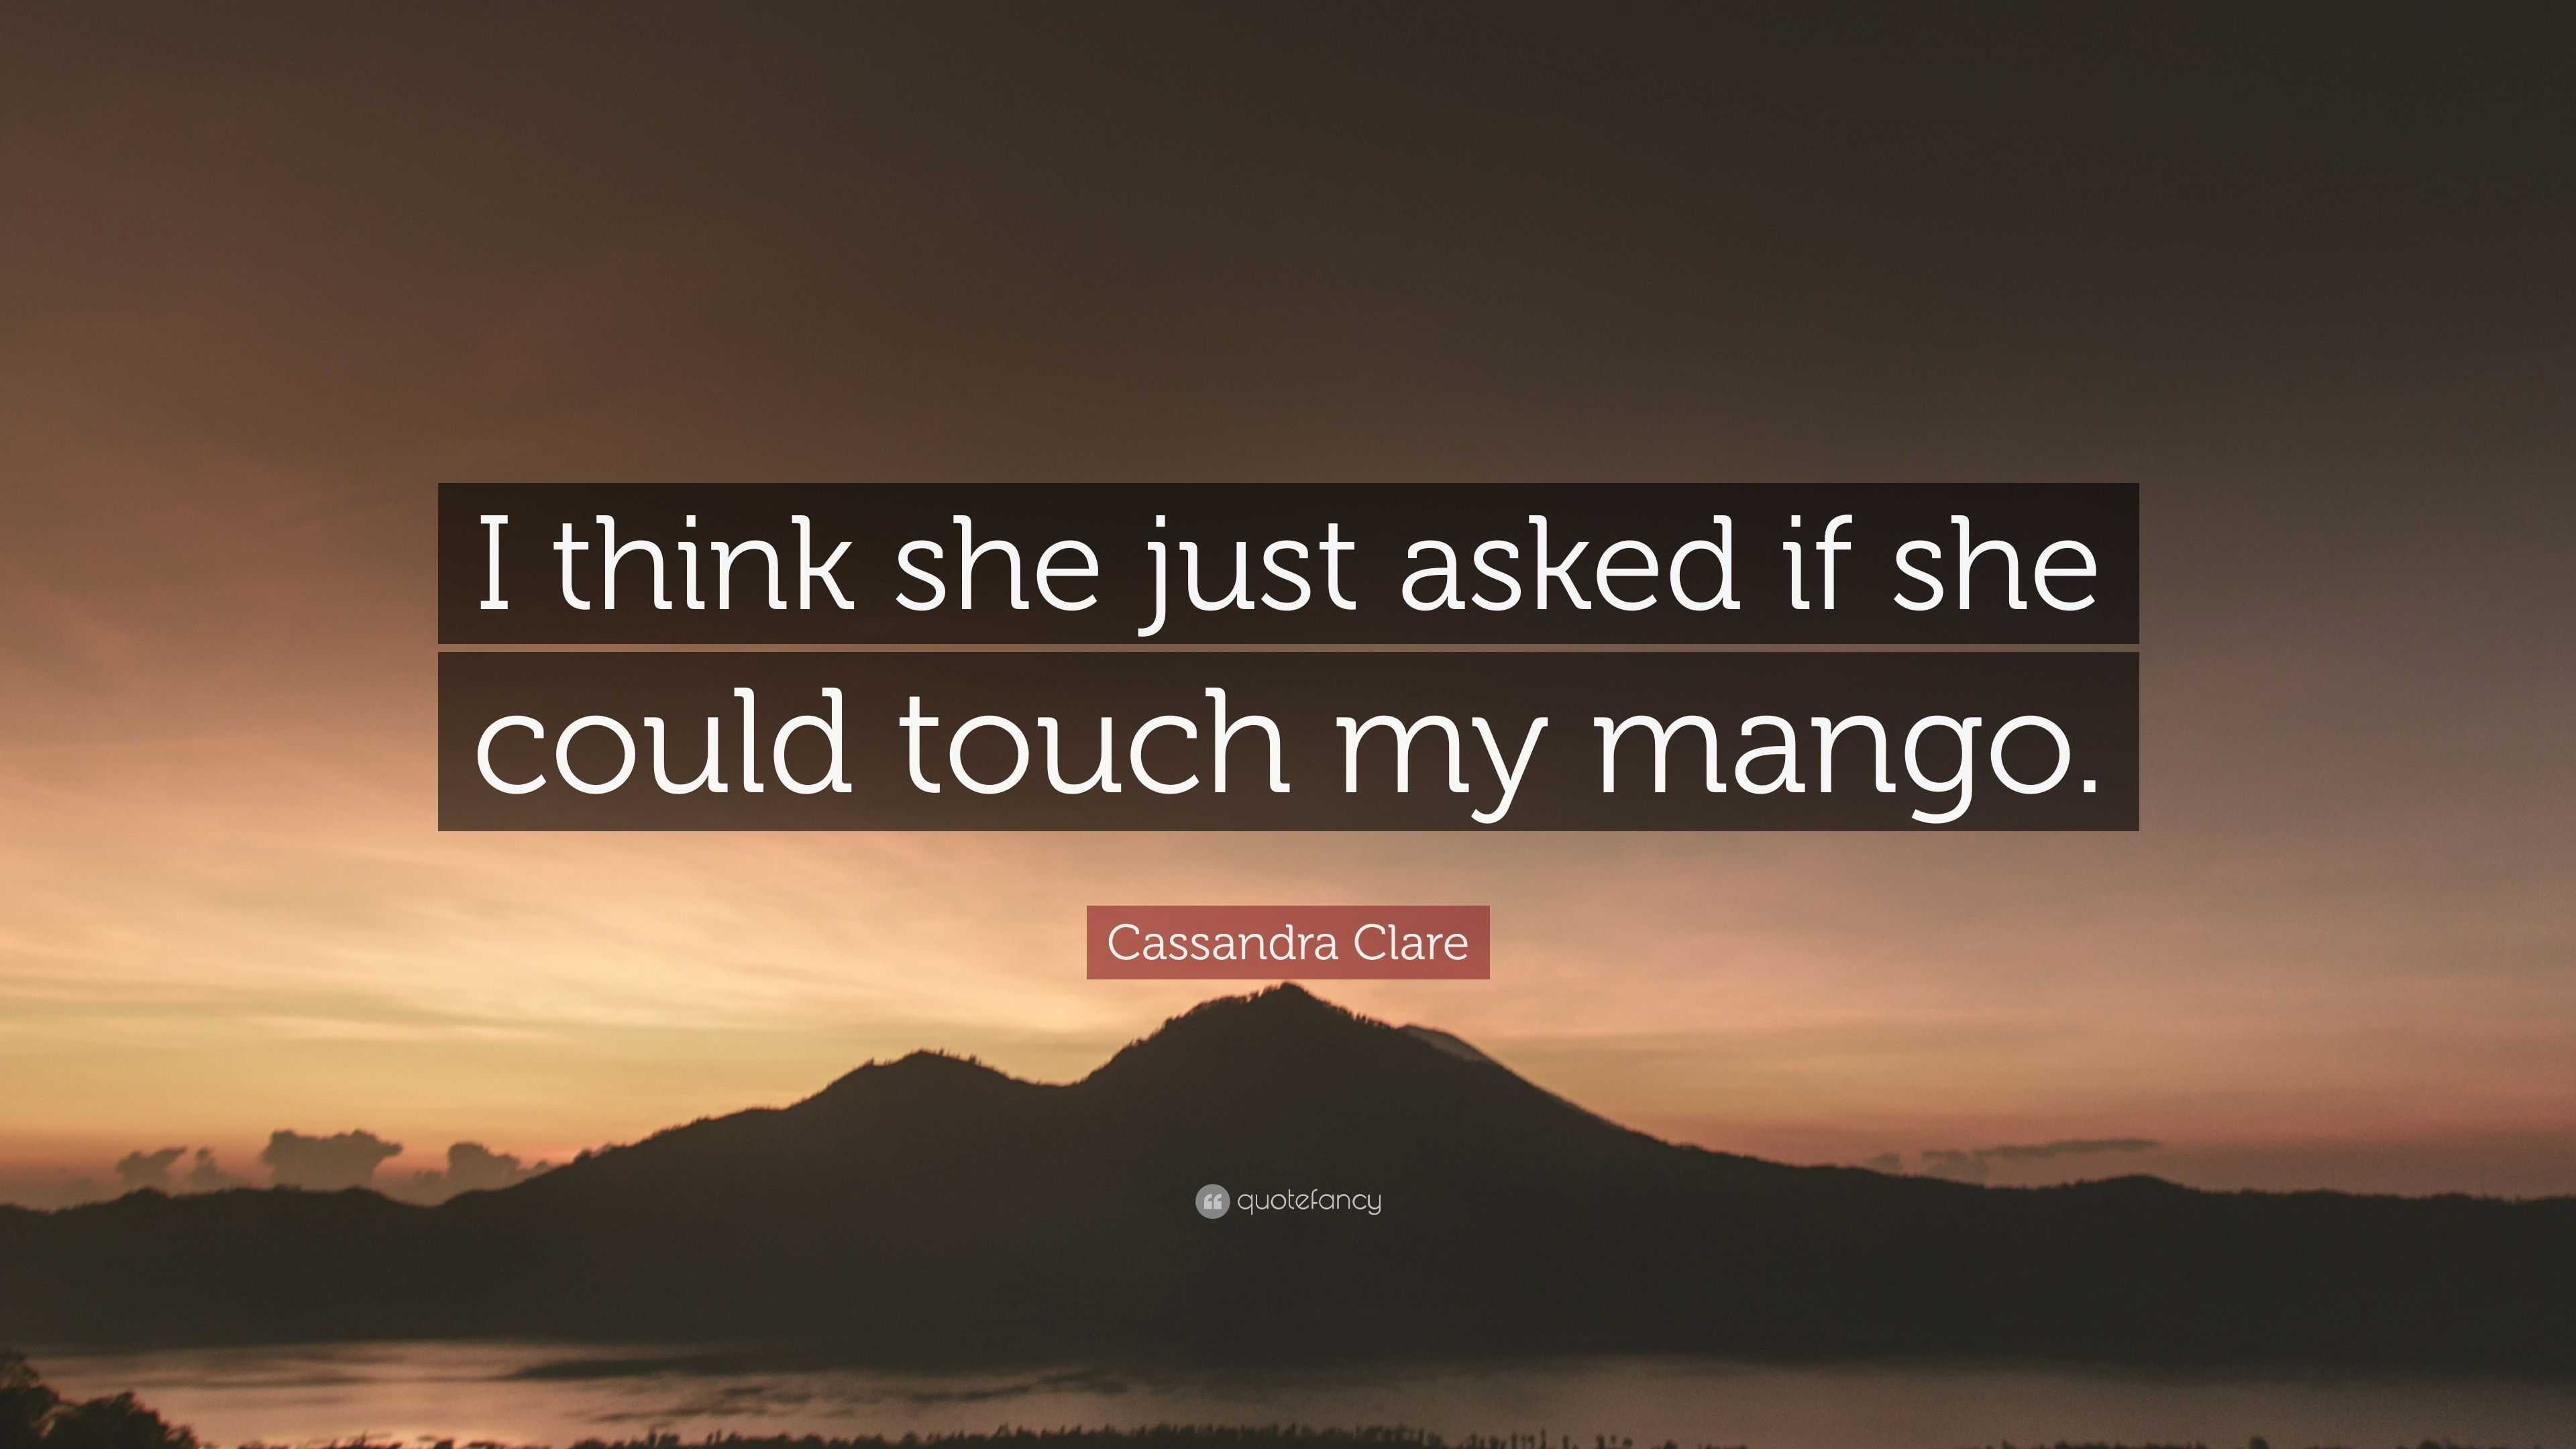 Cassandra Clare Quote “i Think She Just Asked If She Could Touch My Mango ”